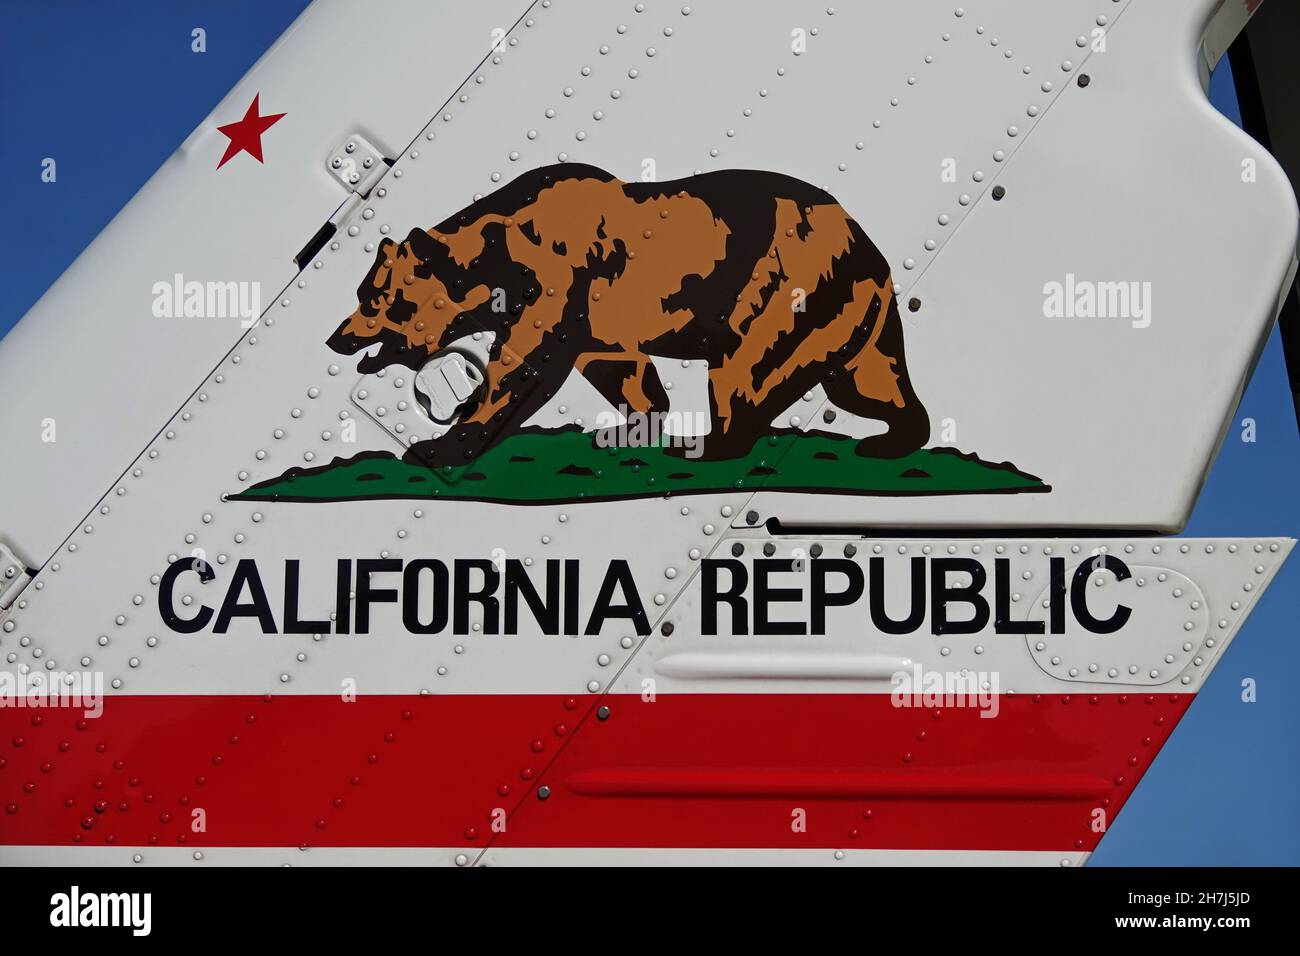 The California Republic (USA) Bear Flag logo is shown painted on the horizontal stabilizer of a helicopter during the day. Stock Photo